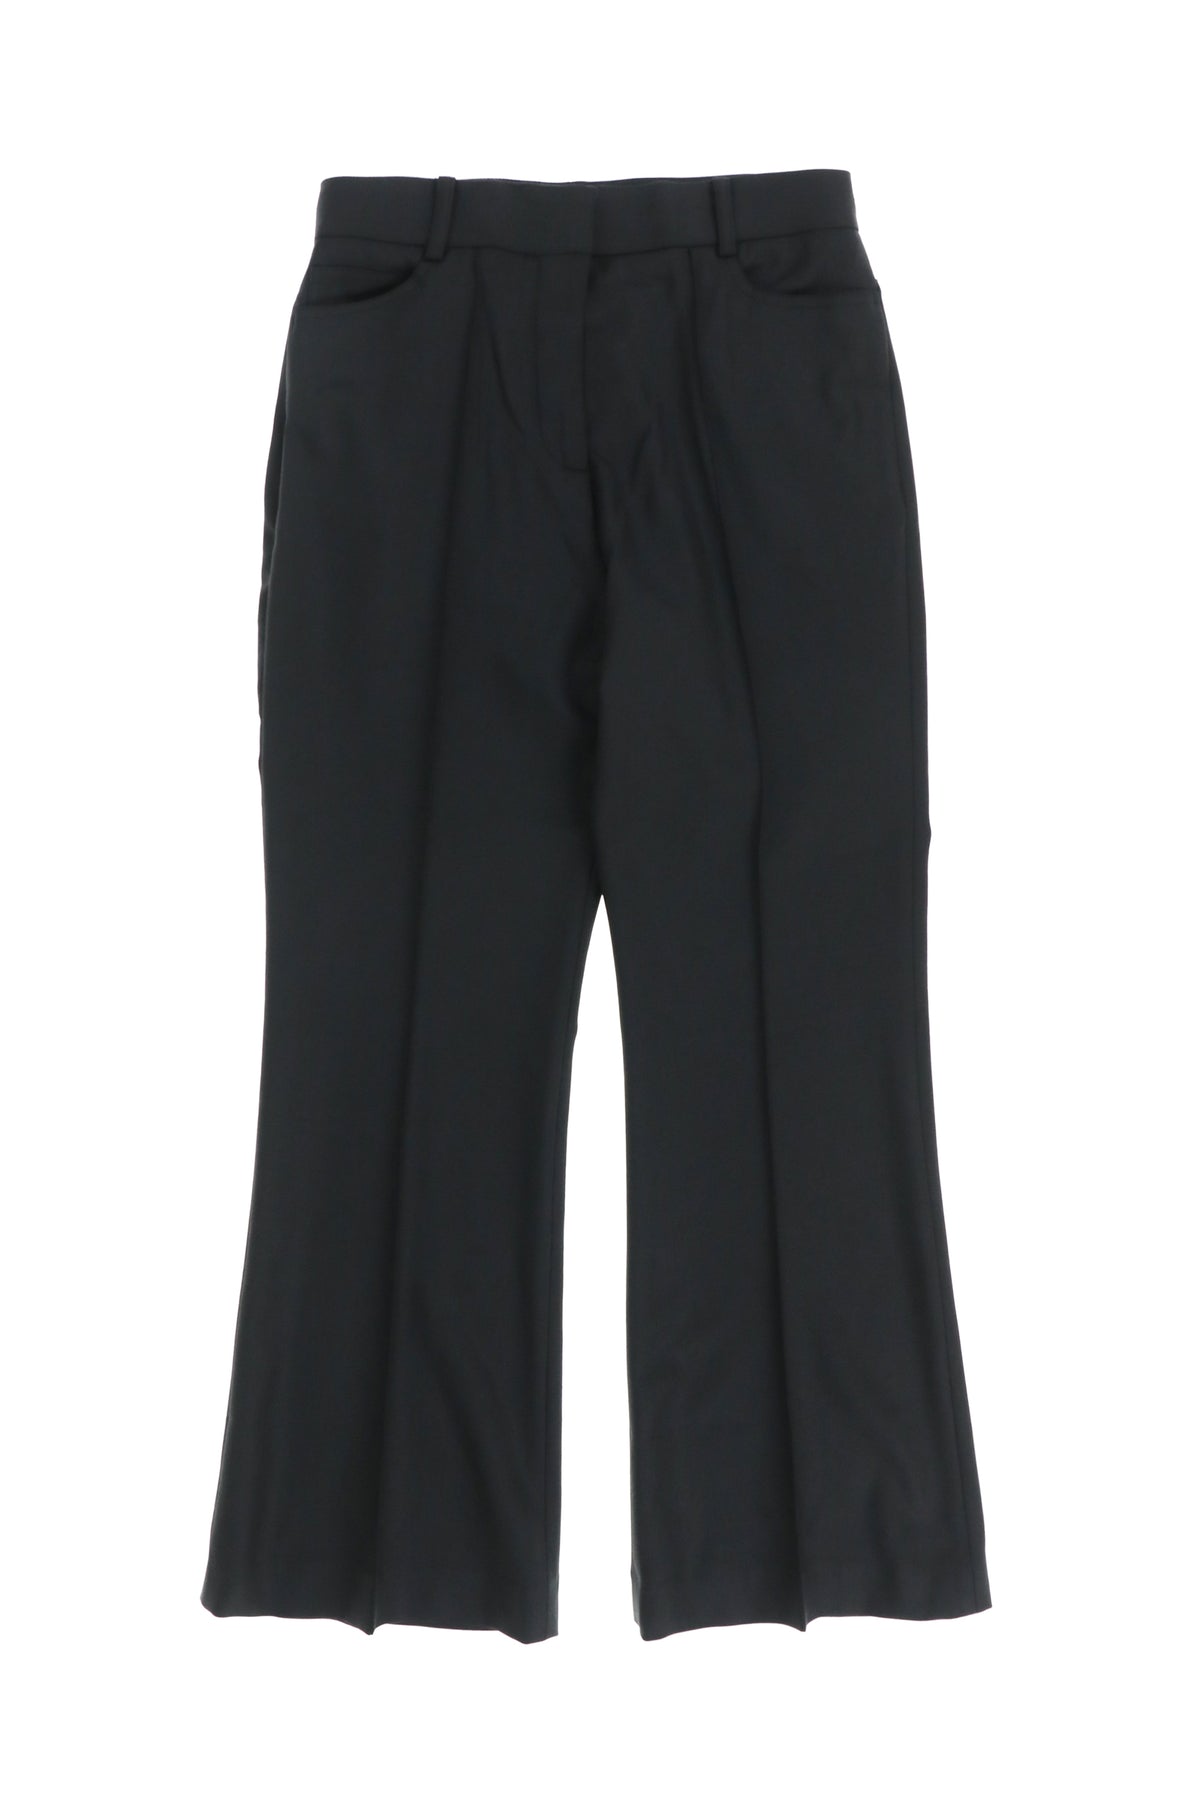 CROPPED TROUSERS / BLK